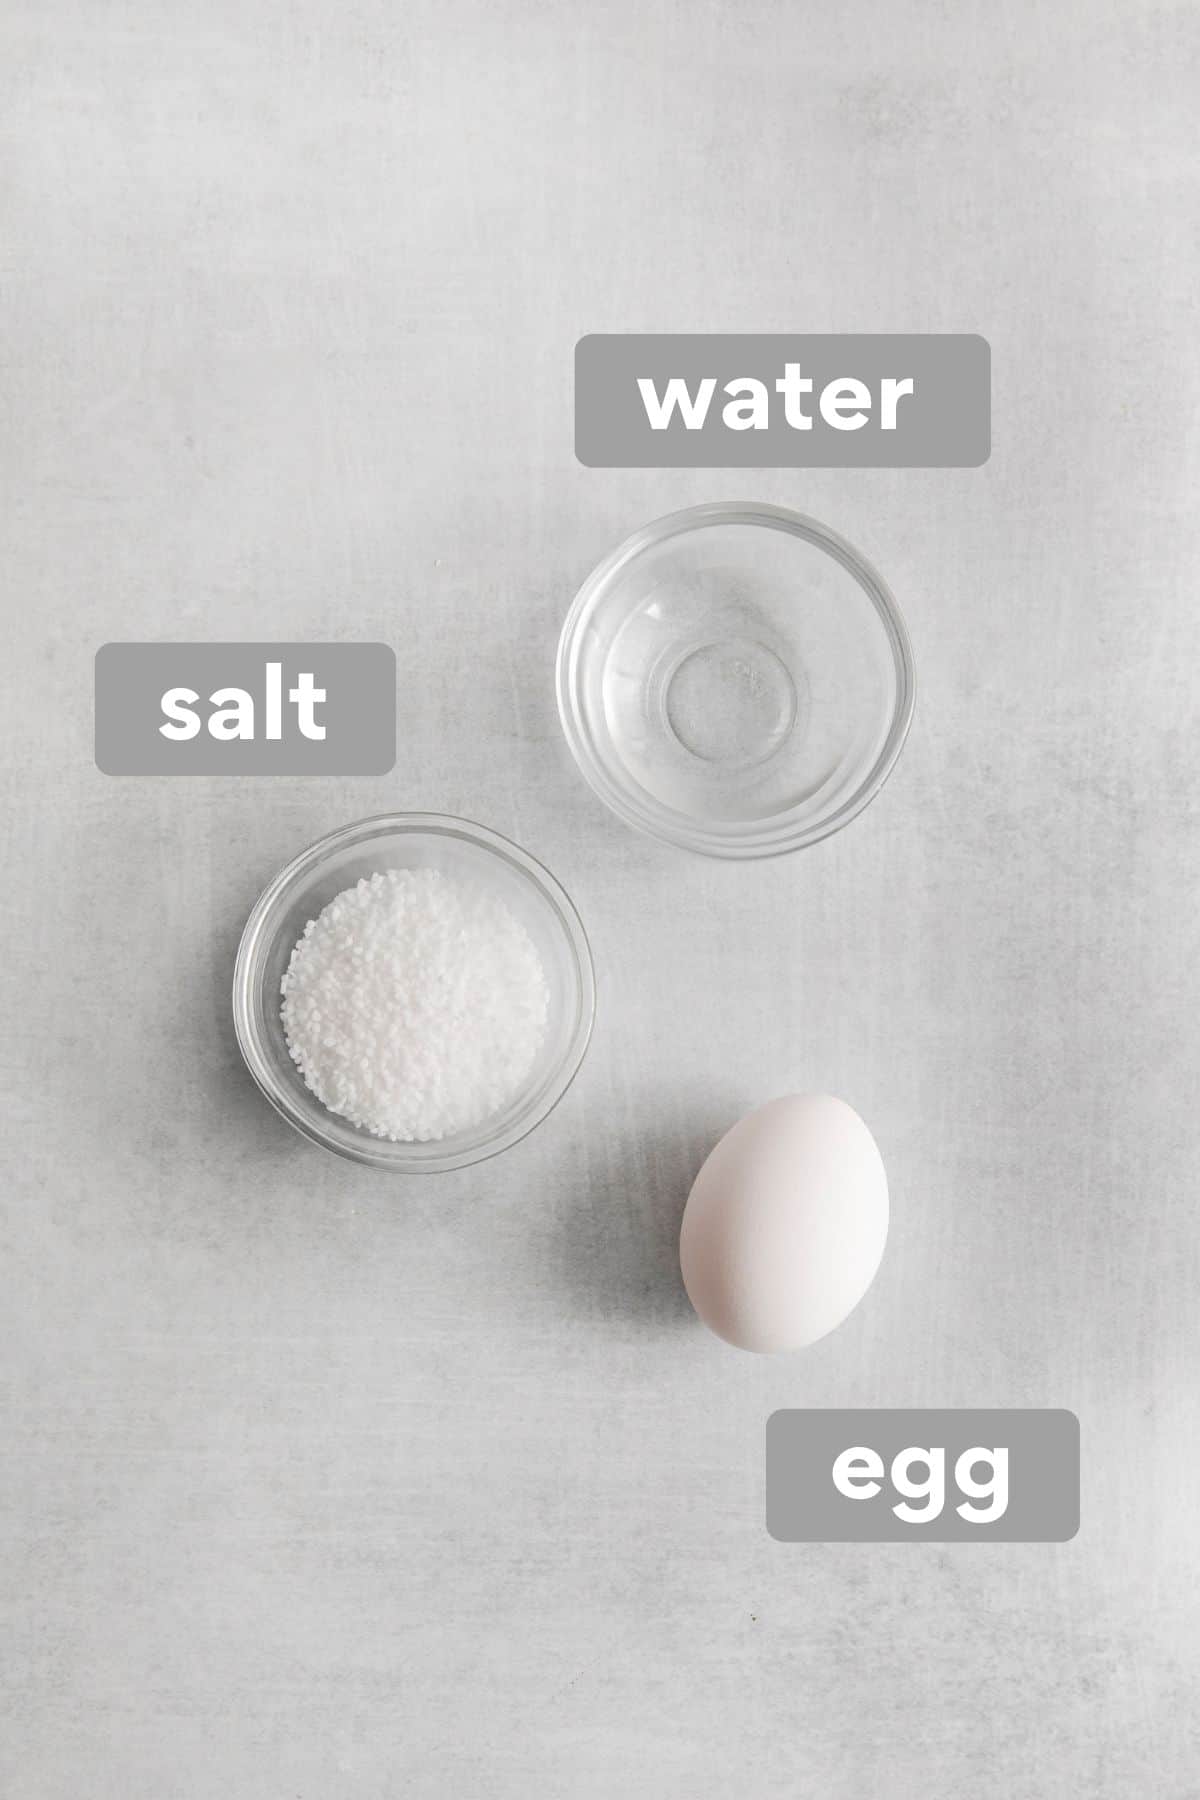 Egg, salt, and water on a counter top